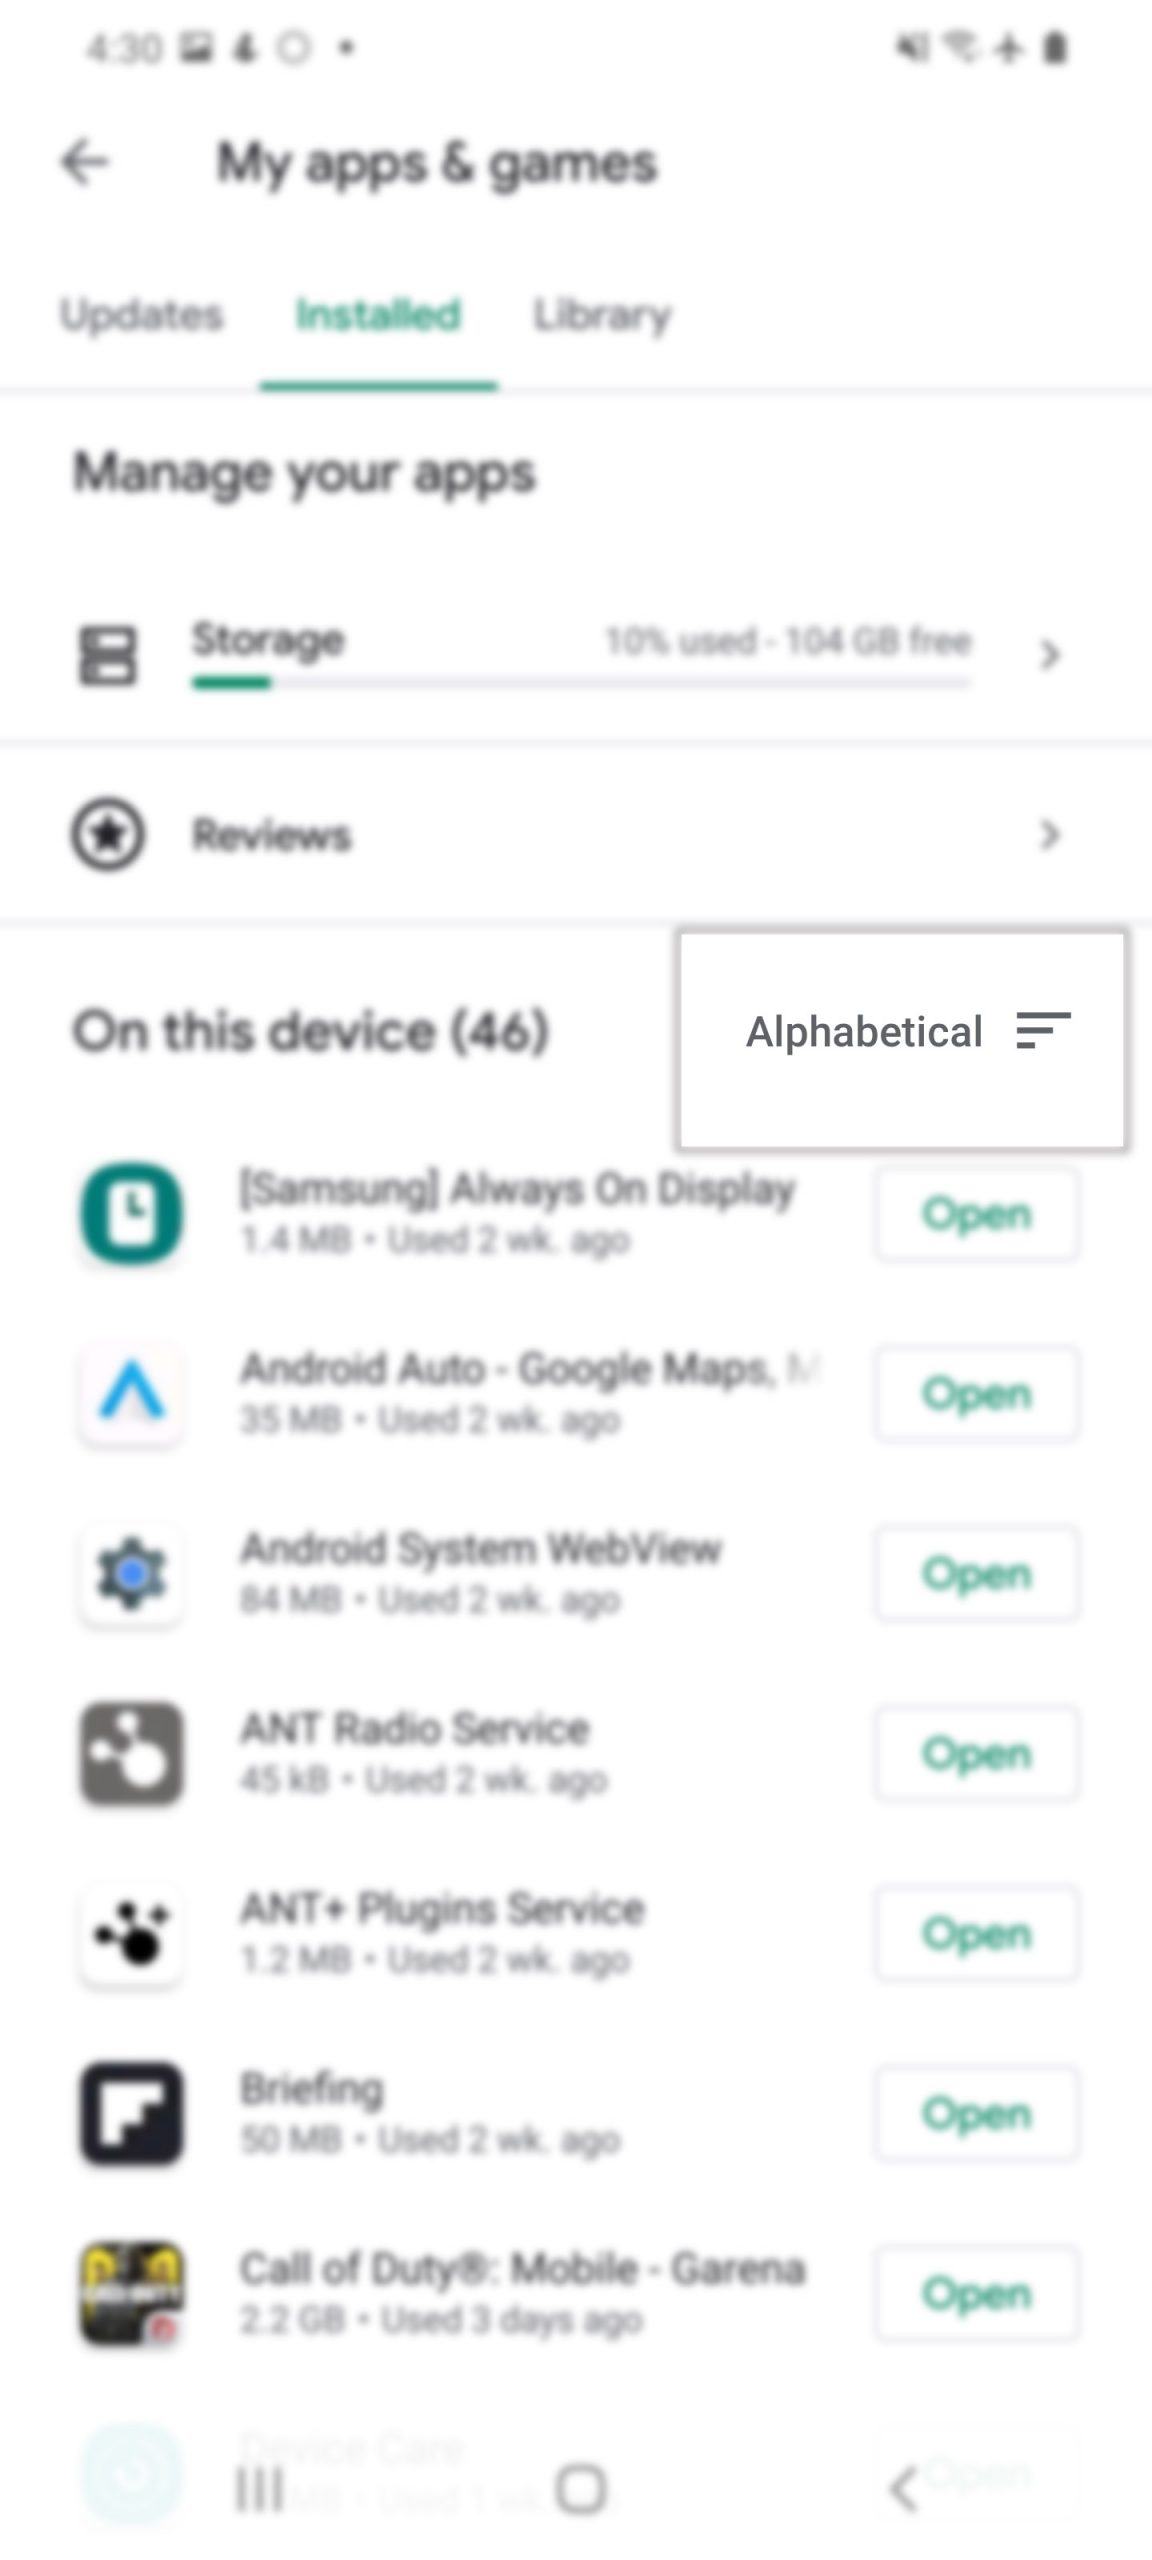 remove ad pop-ups and malware on galaxy s20 - alphabetical order